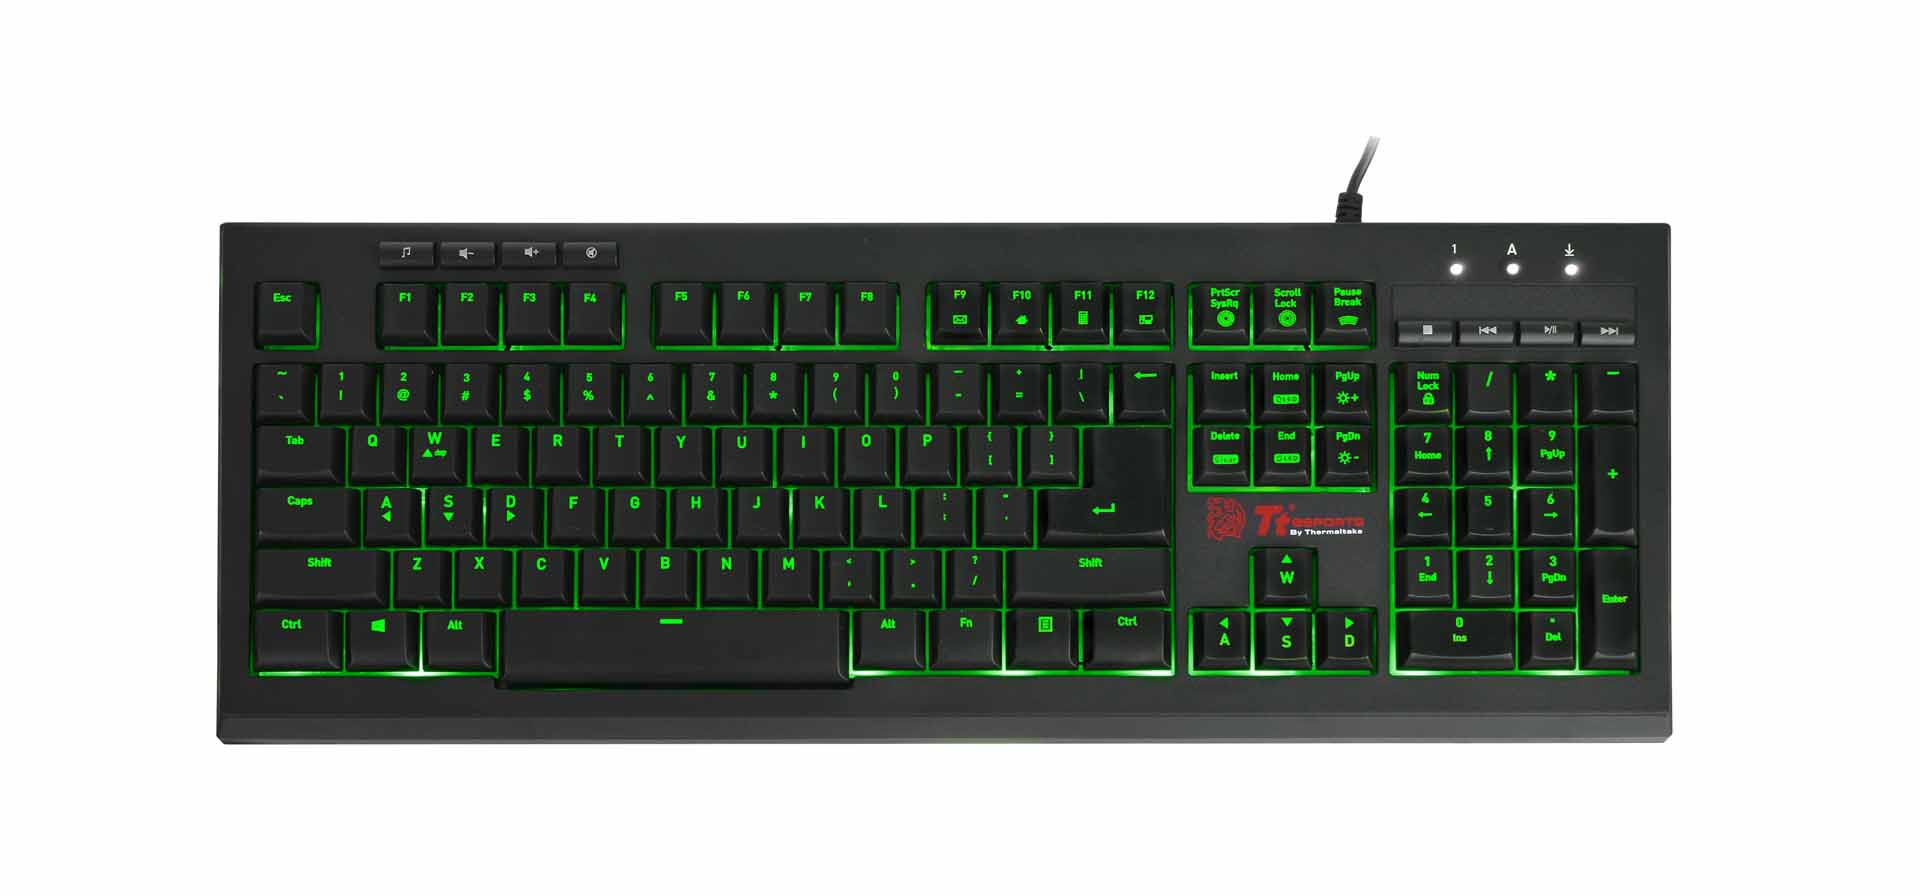 Tt ESports Commander LED Gaming Keyboard And Mouse Combo: How To Change Colors